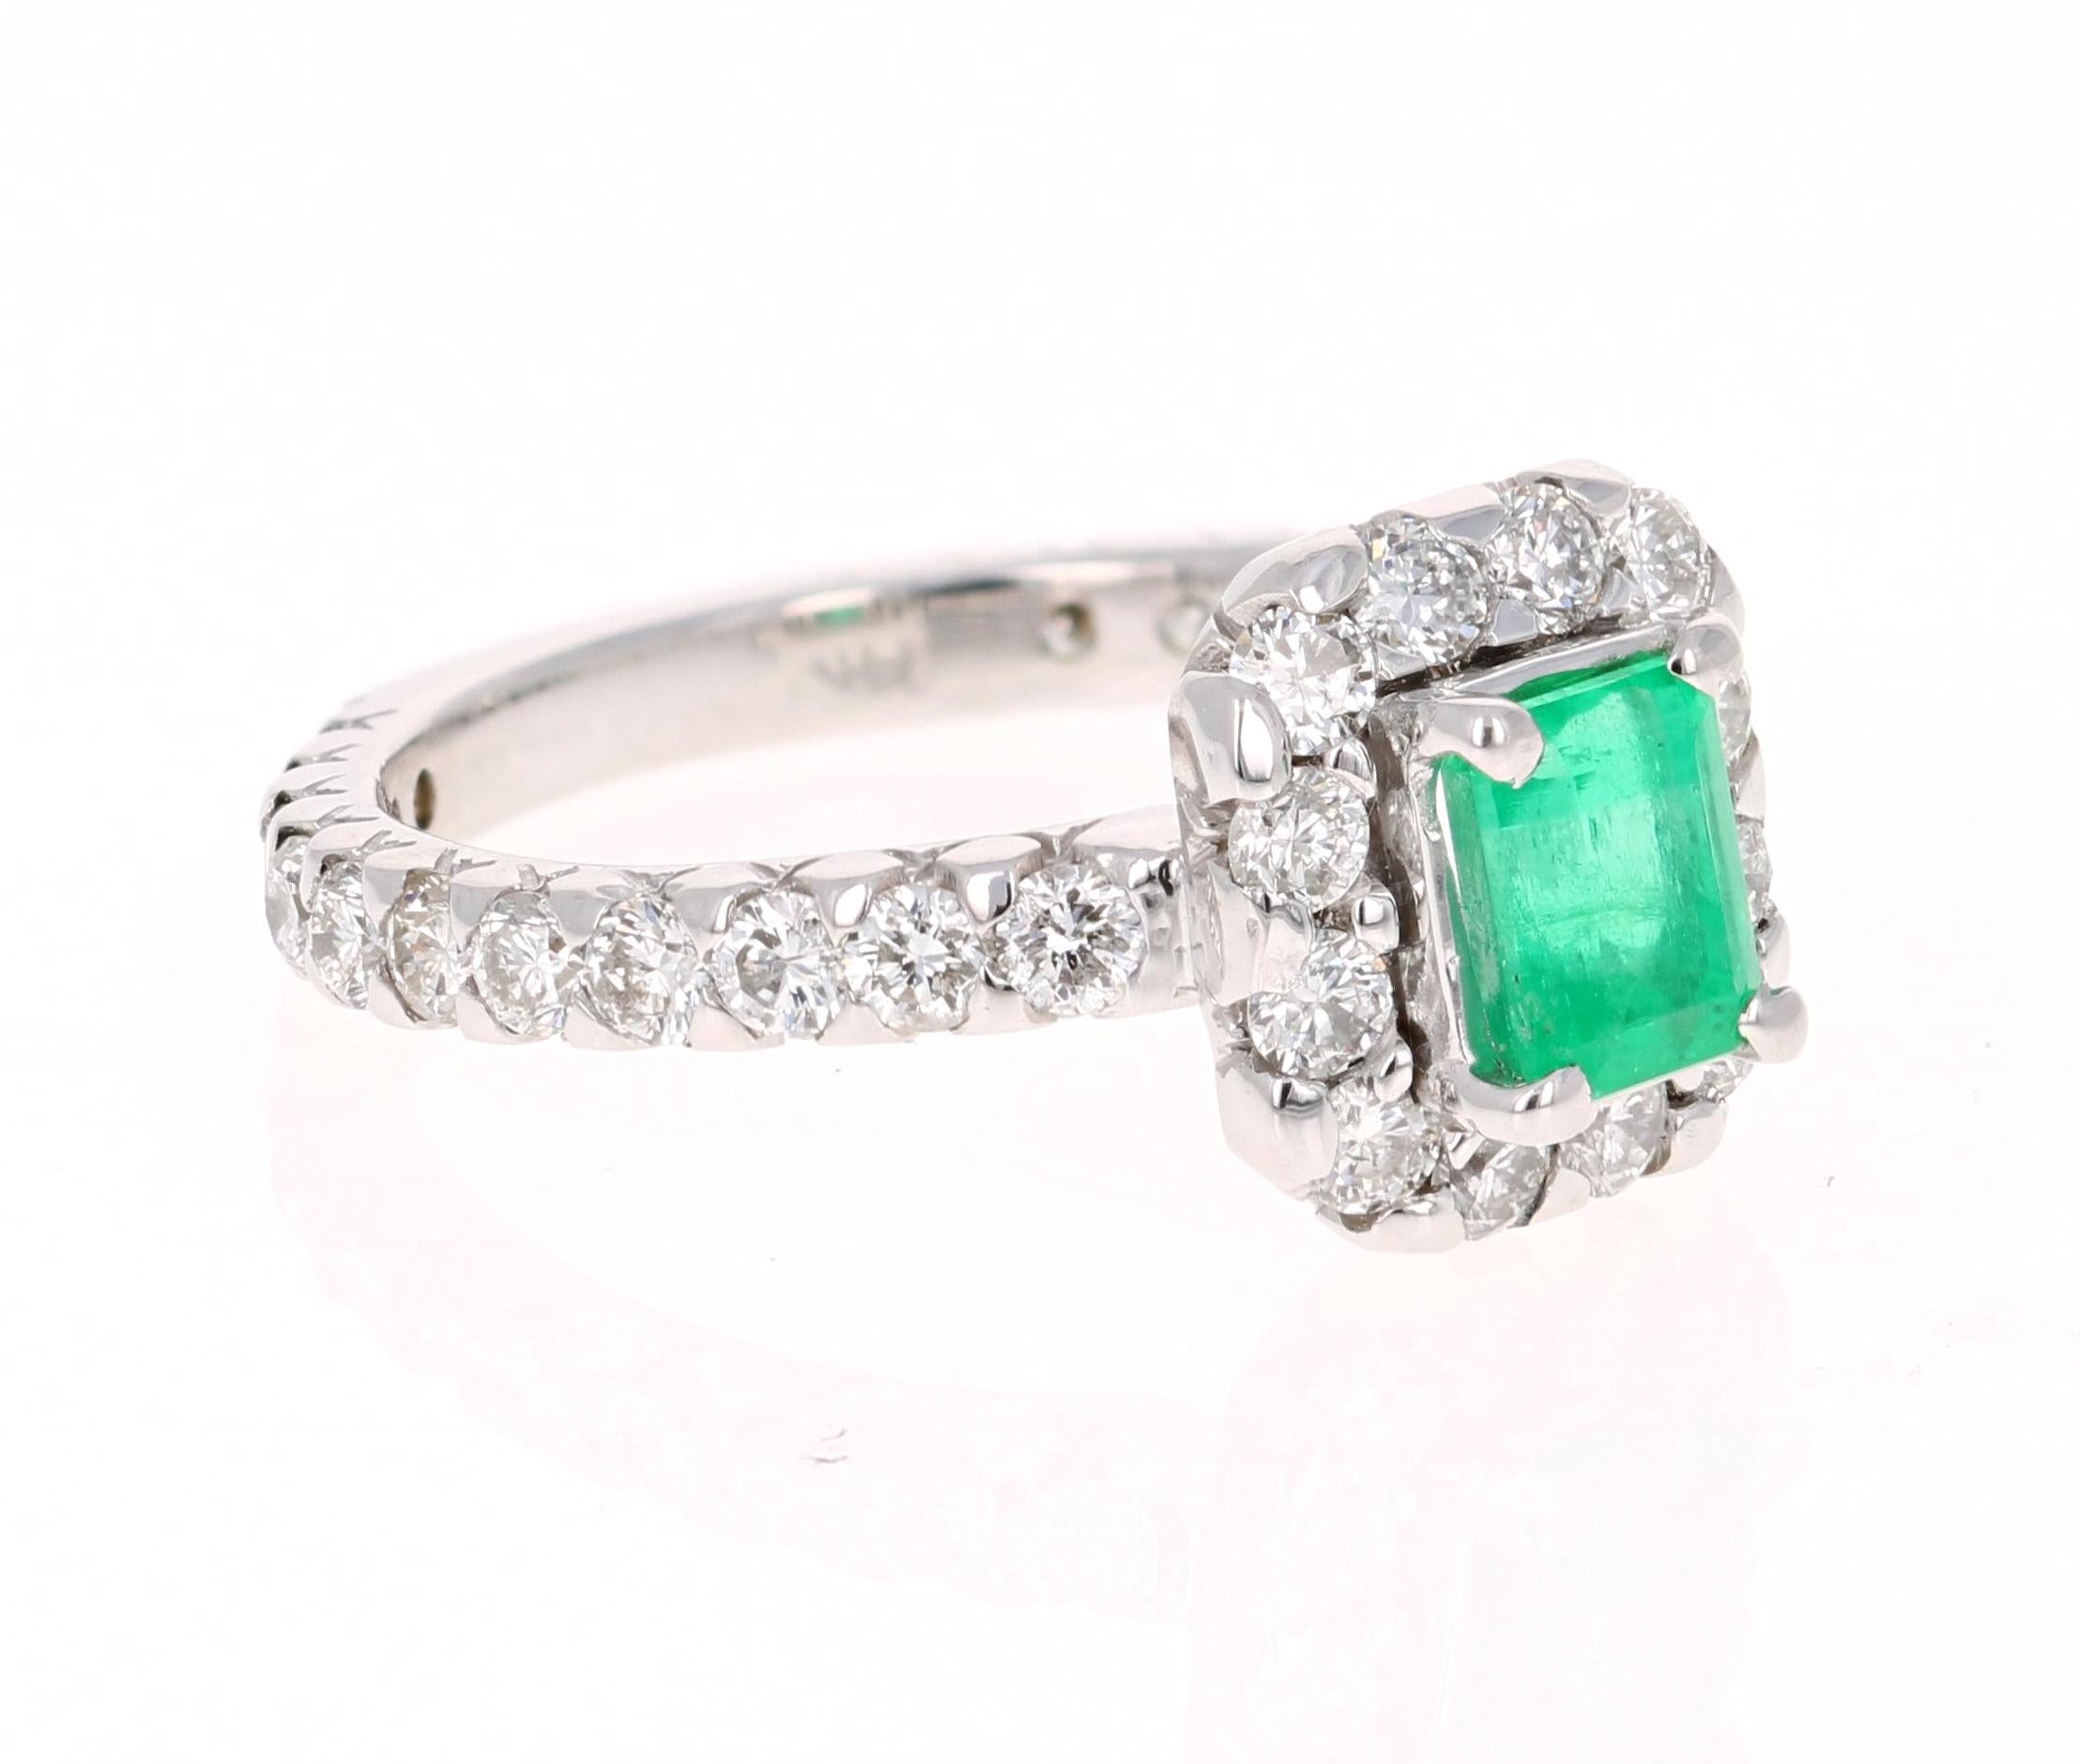 A beautiful & classic setting holding a Natural Emerald that weighs 0.78 carats. Surrounded by 24 Round Cut Diamonds that weigh 1.05 carats with a clarity & color of SI-F.  The total carat weight of the ring is 1.83 carats.

The Emerald Cut Emerald